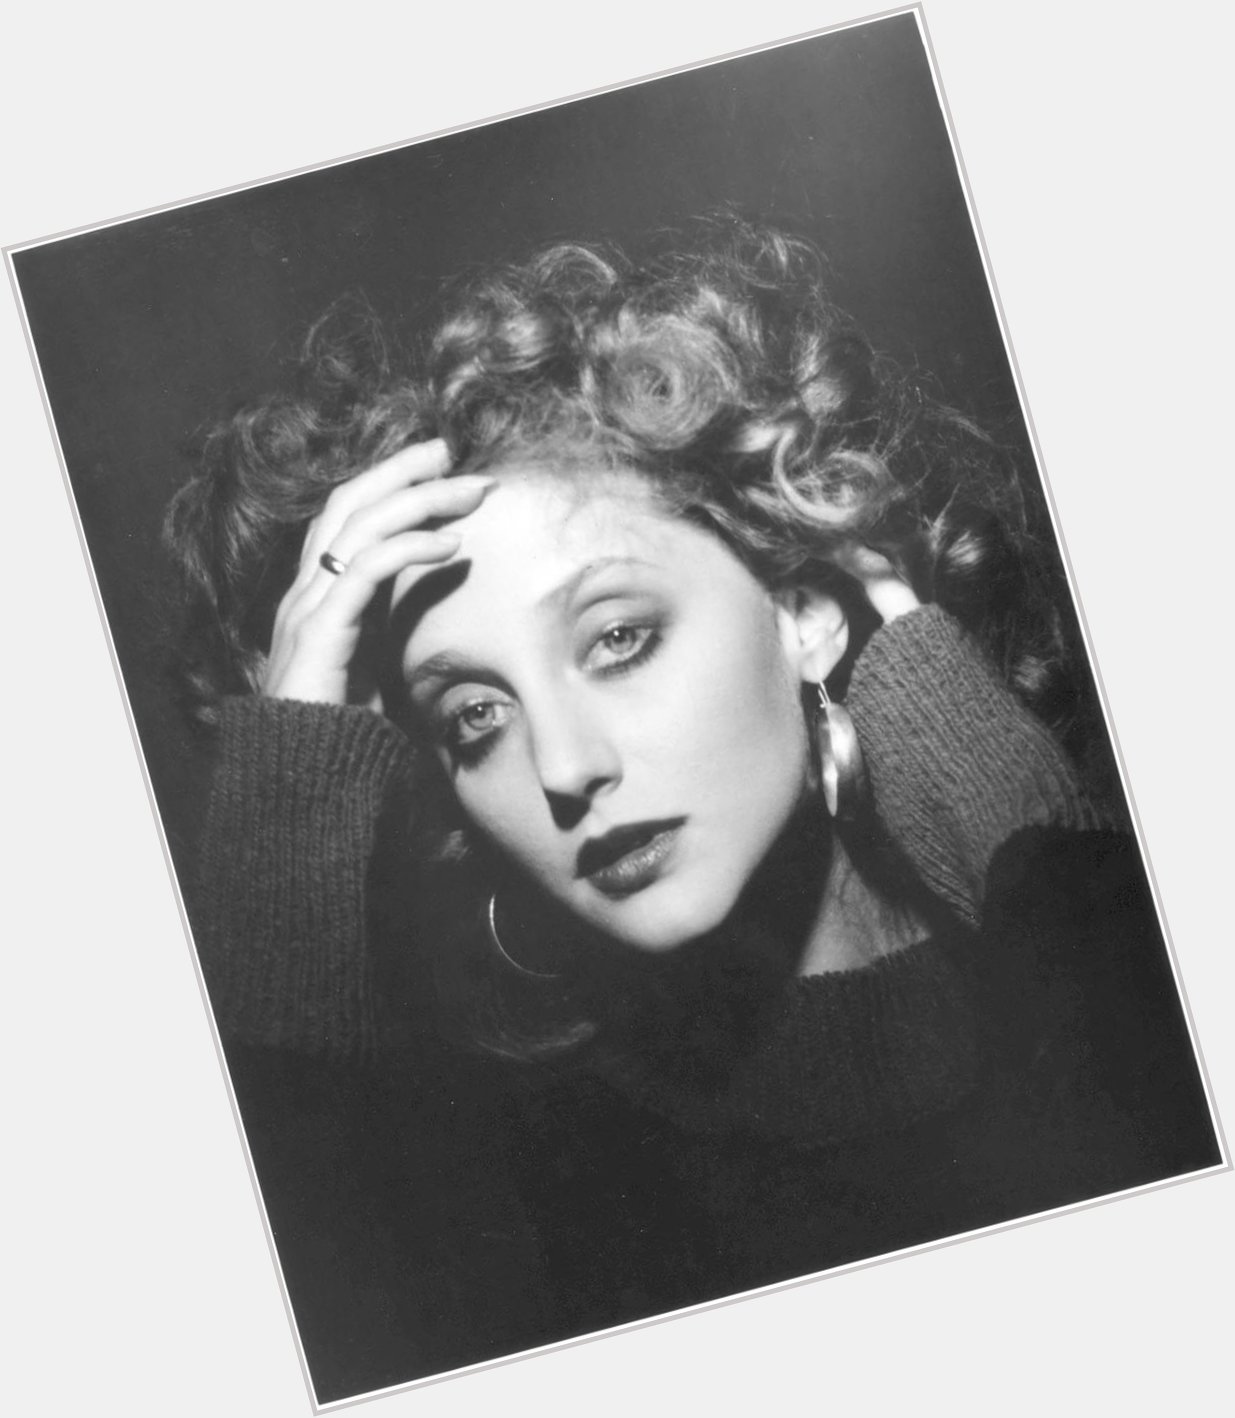 Happy 67th birthday to Carol Kane! Loved her in Taxi, The Princess Bride, and The Unbreakable Kimmy Schmidt. 